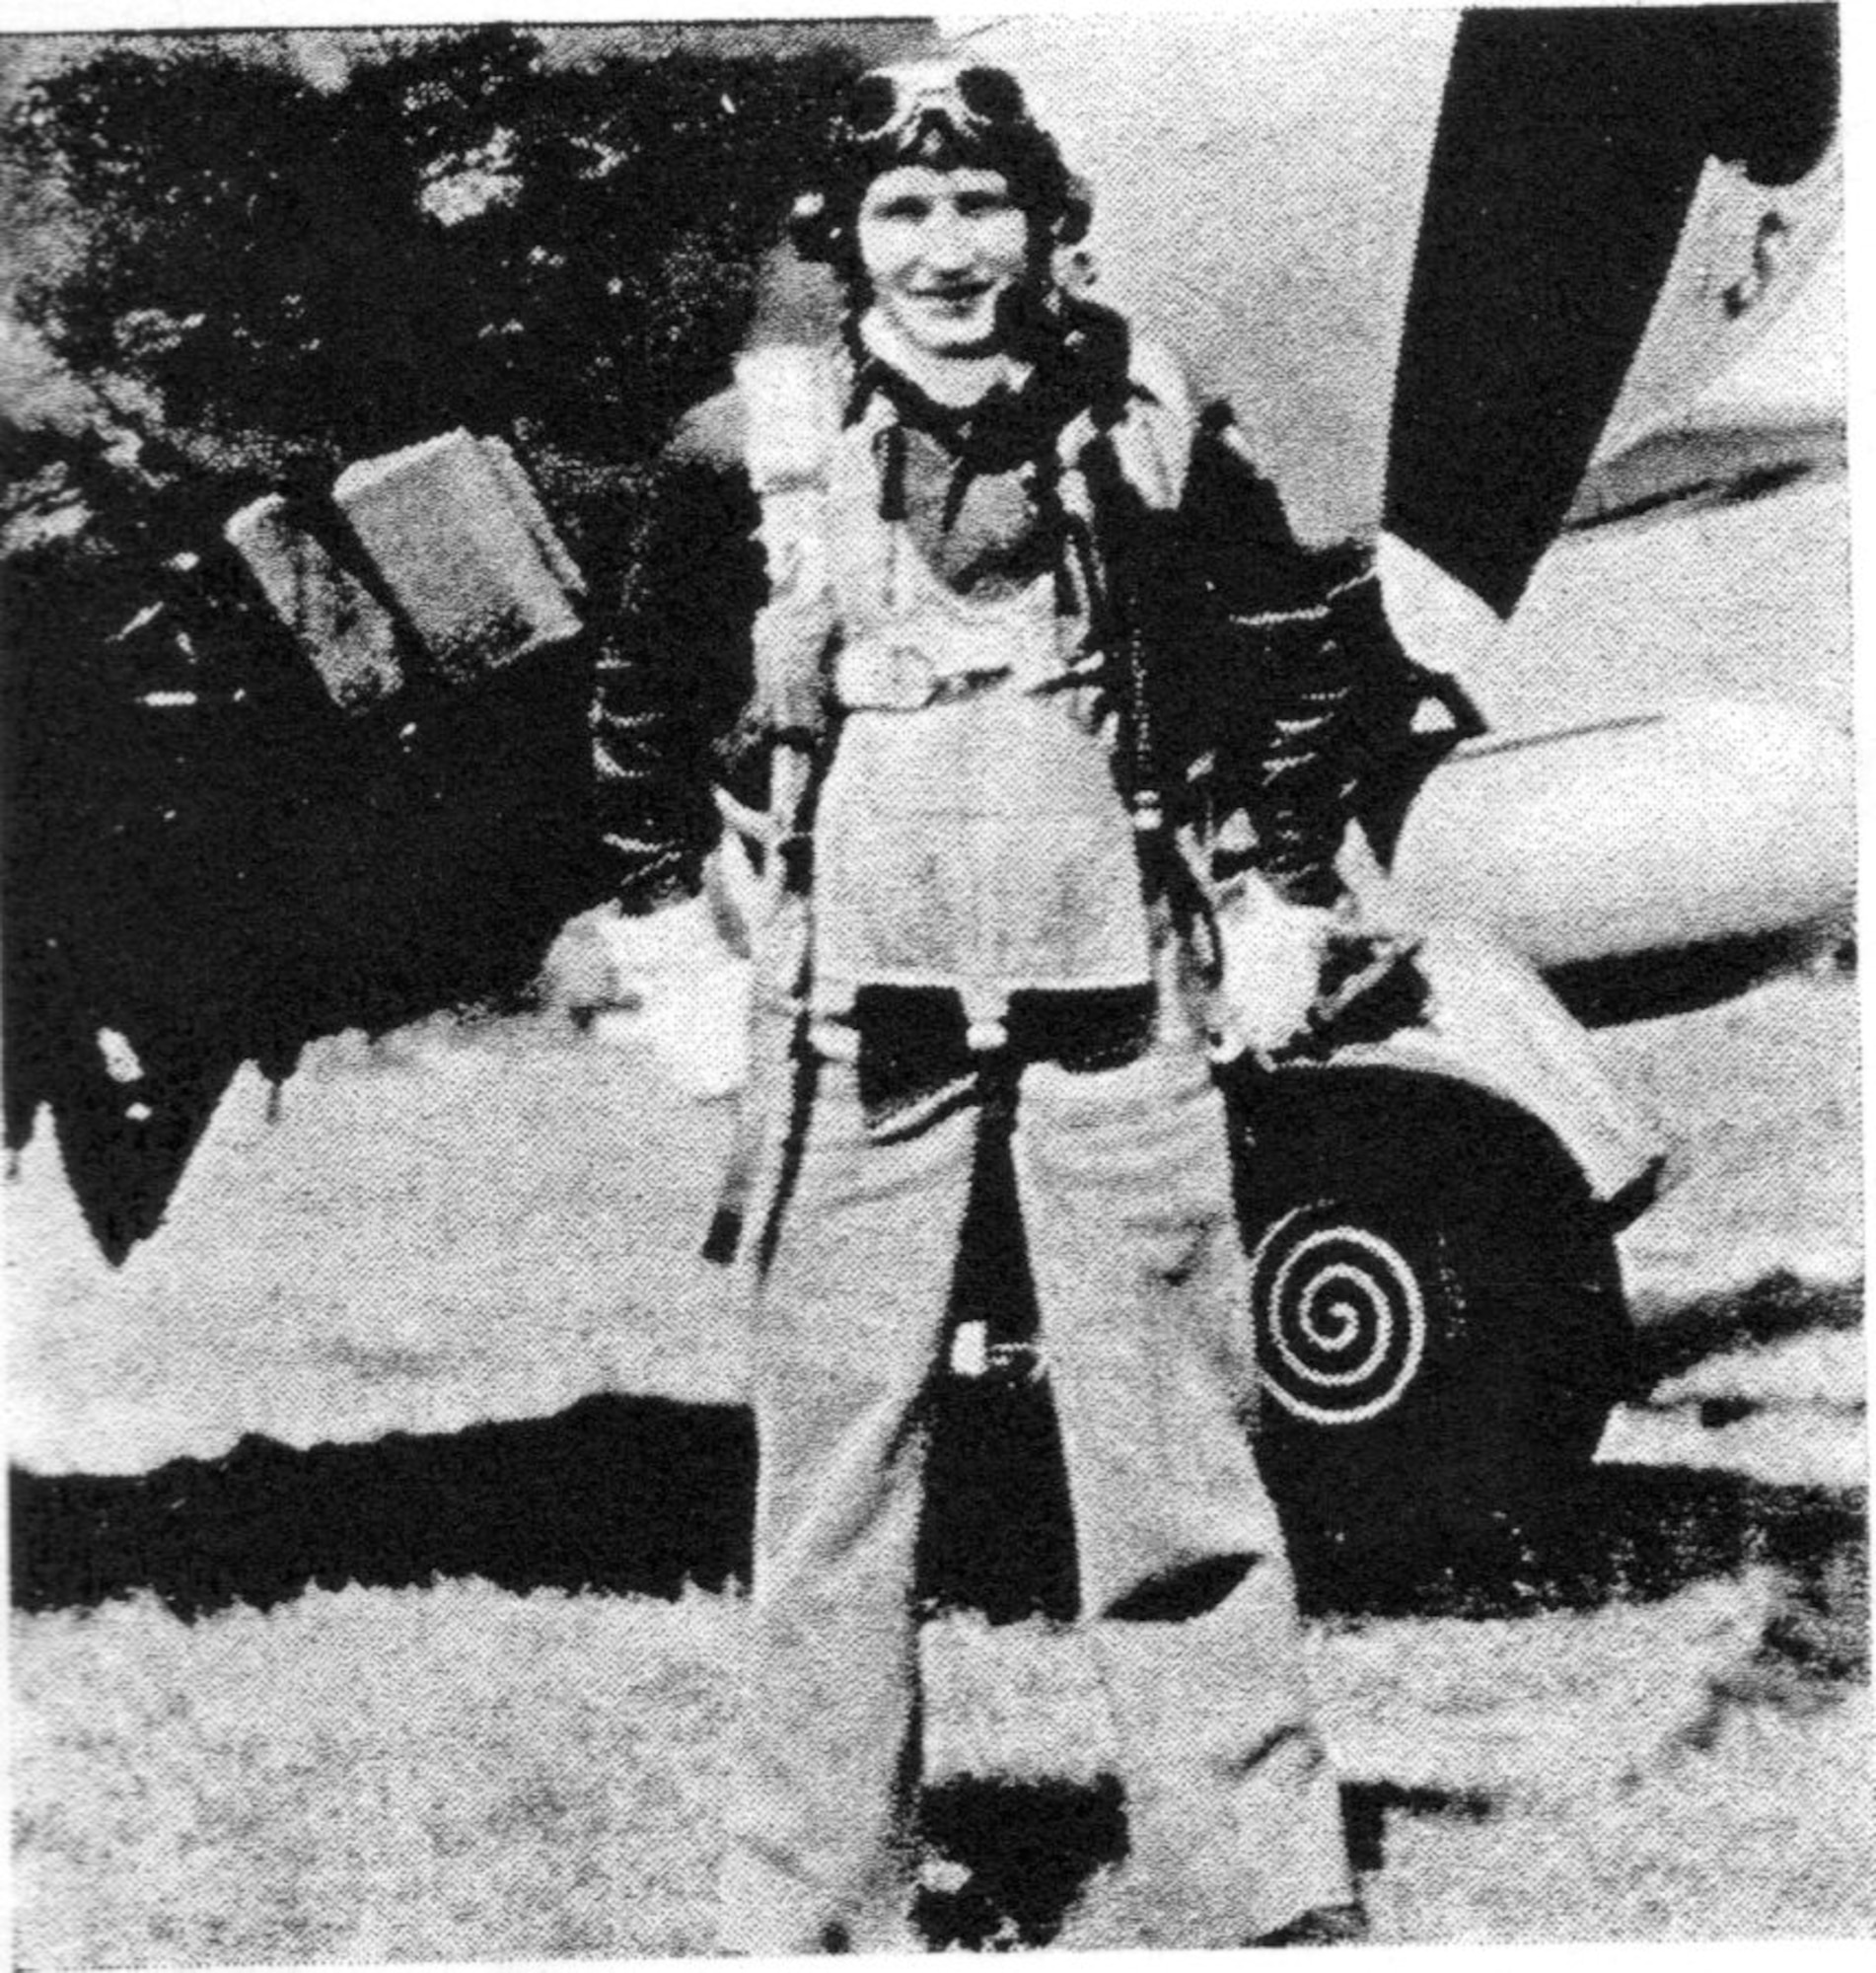 Capt. Uno Salmi of the 406FS claimed a Luftwaffe FW-190 in the 371FG’s first day of air combat in Europe.  He went Missing in Action on June 16, 1944, near St. Lo, France.  He is remembered on the Tablets of the Missing at the Cambridge American Cemetery, Cambridge, England.  (Courtesy “The Story of the 371st Fighter Group in the E.T.O.”)